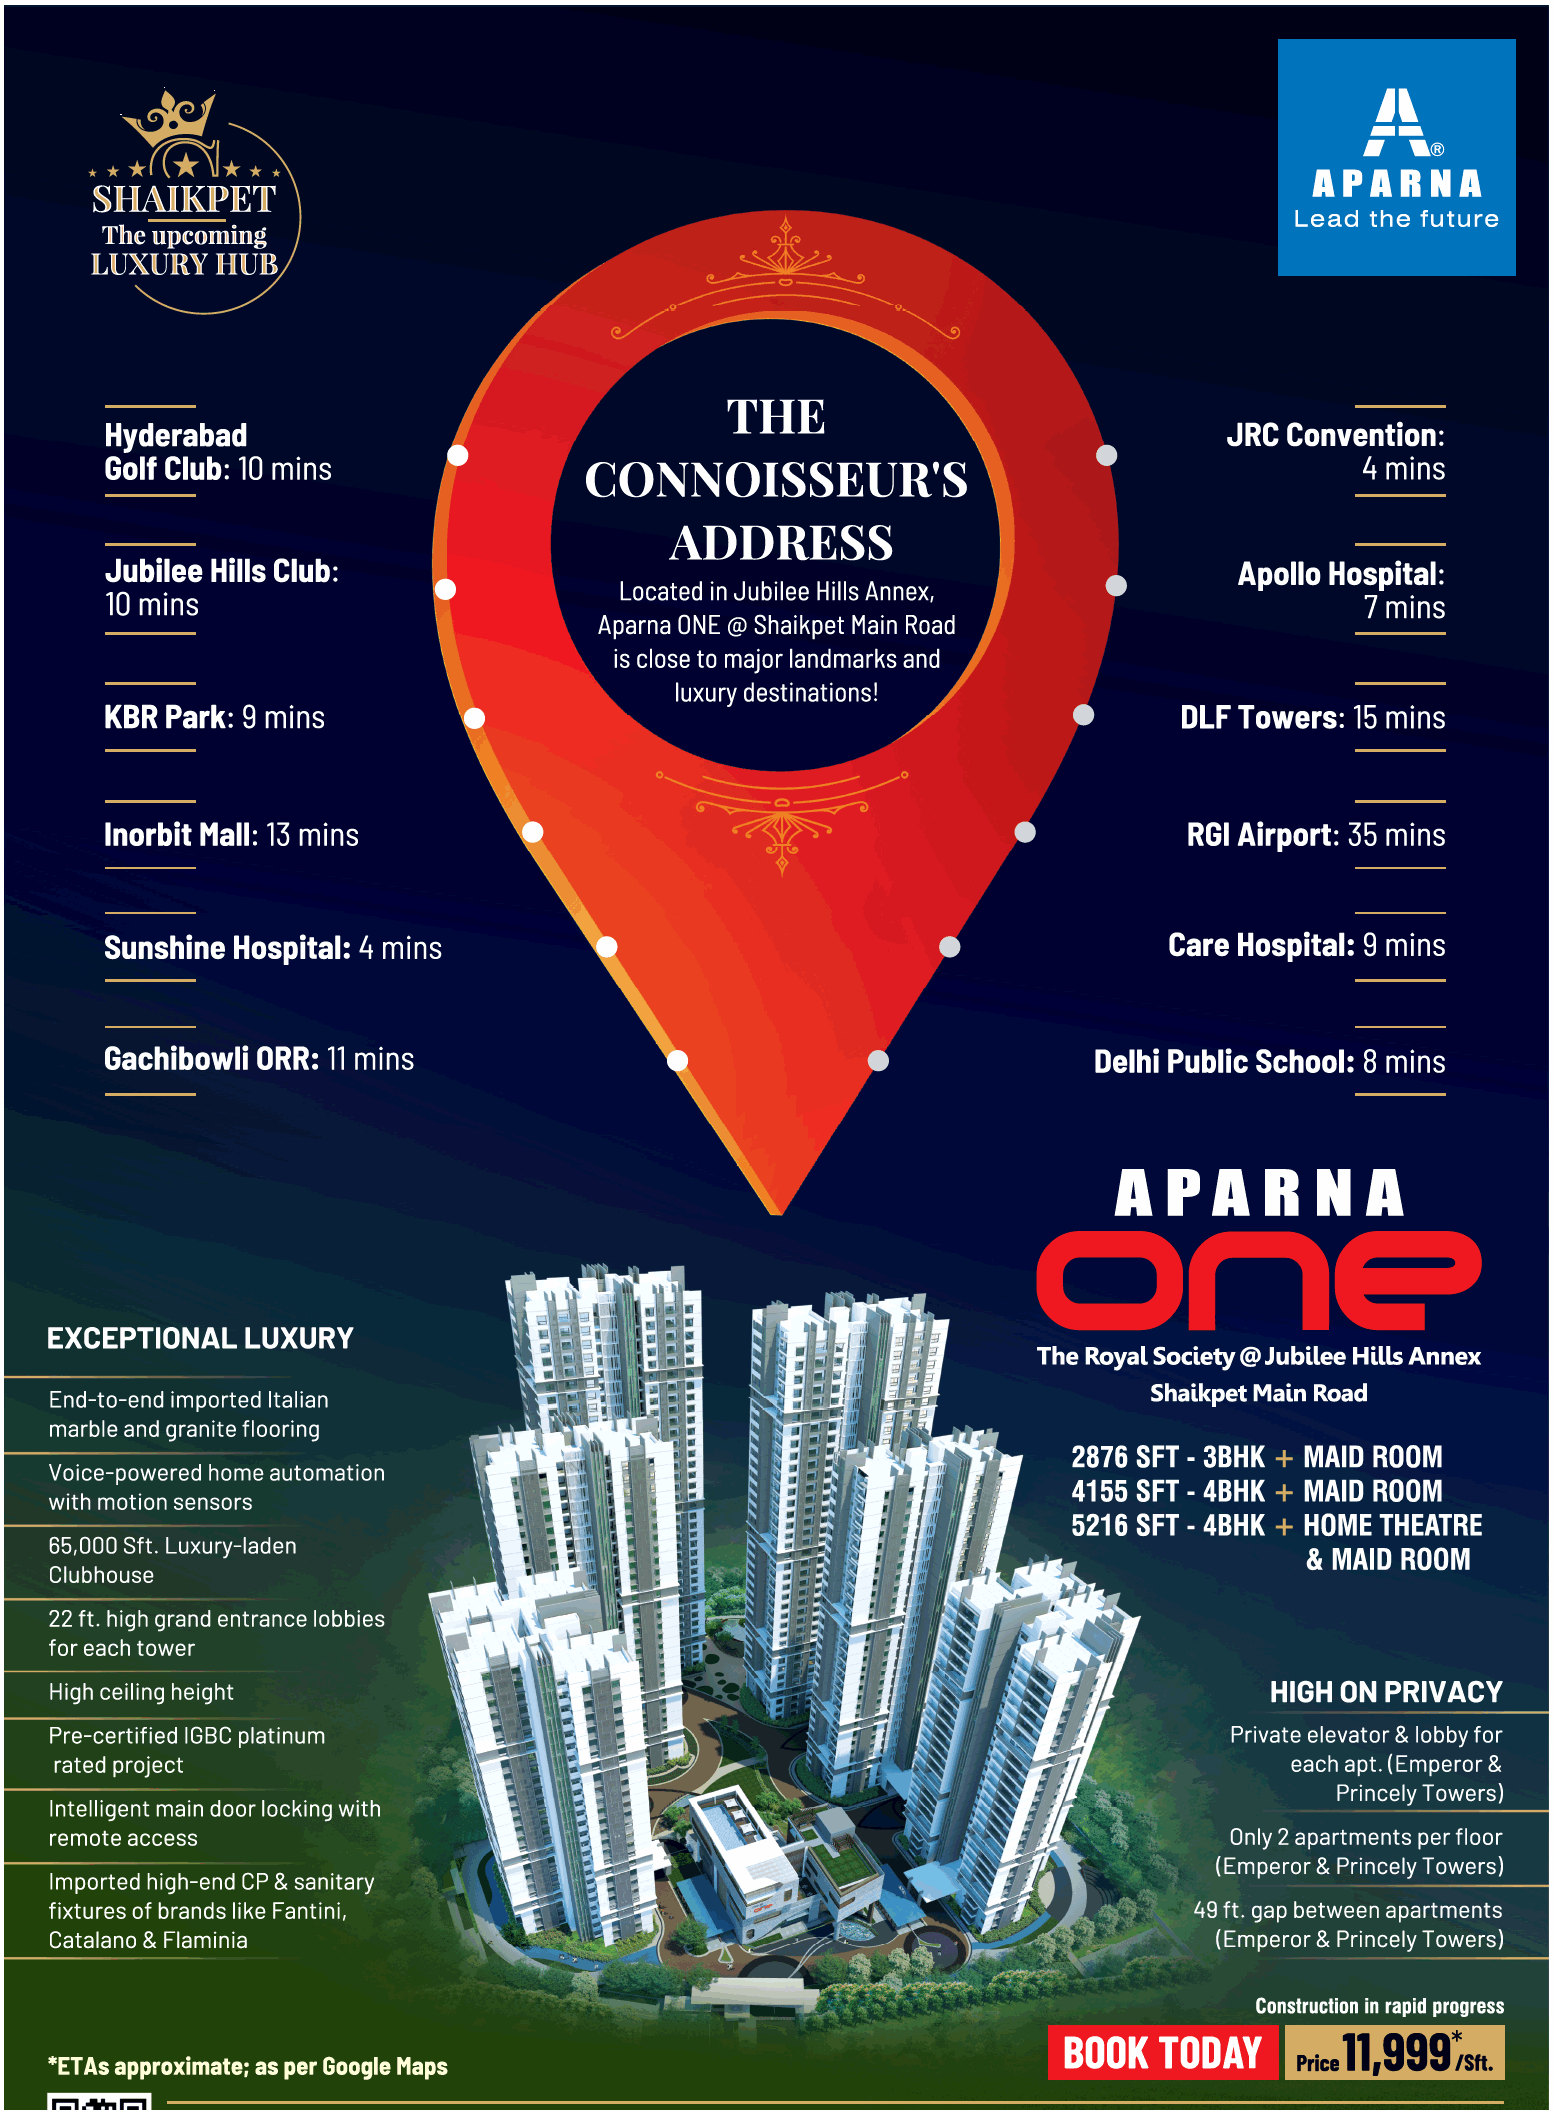 Aparna One the royal society at Jubilee Hills, Annex Shaikpet Main Road in Hyderabad